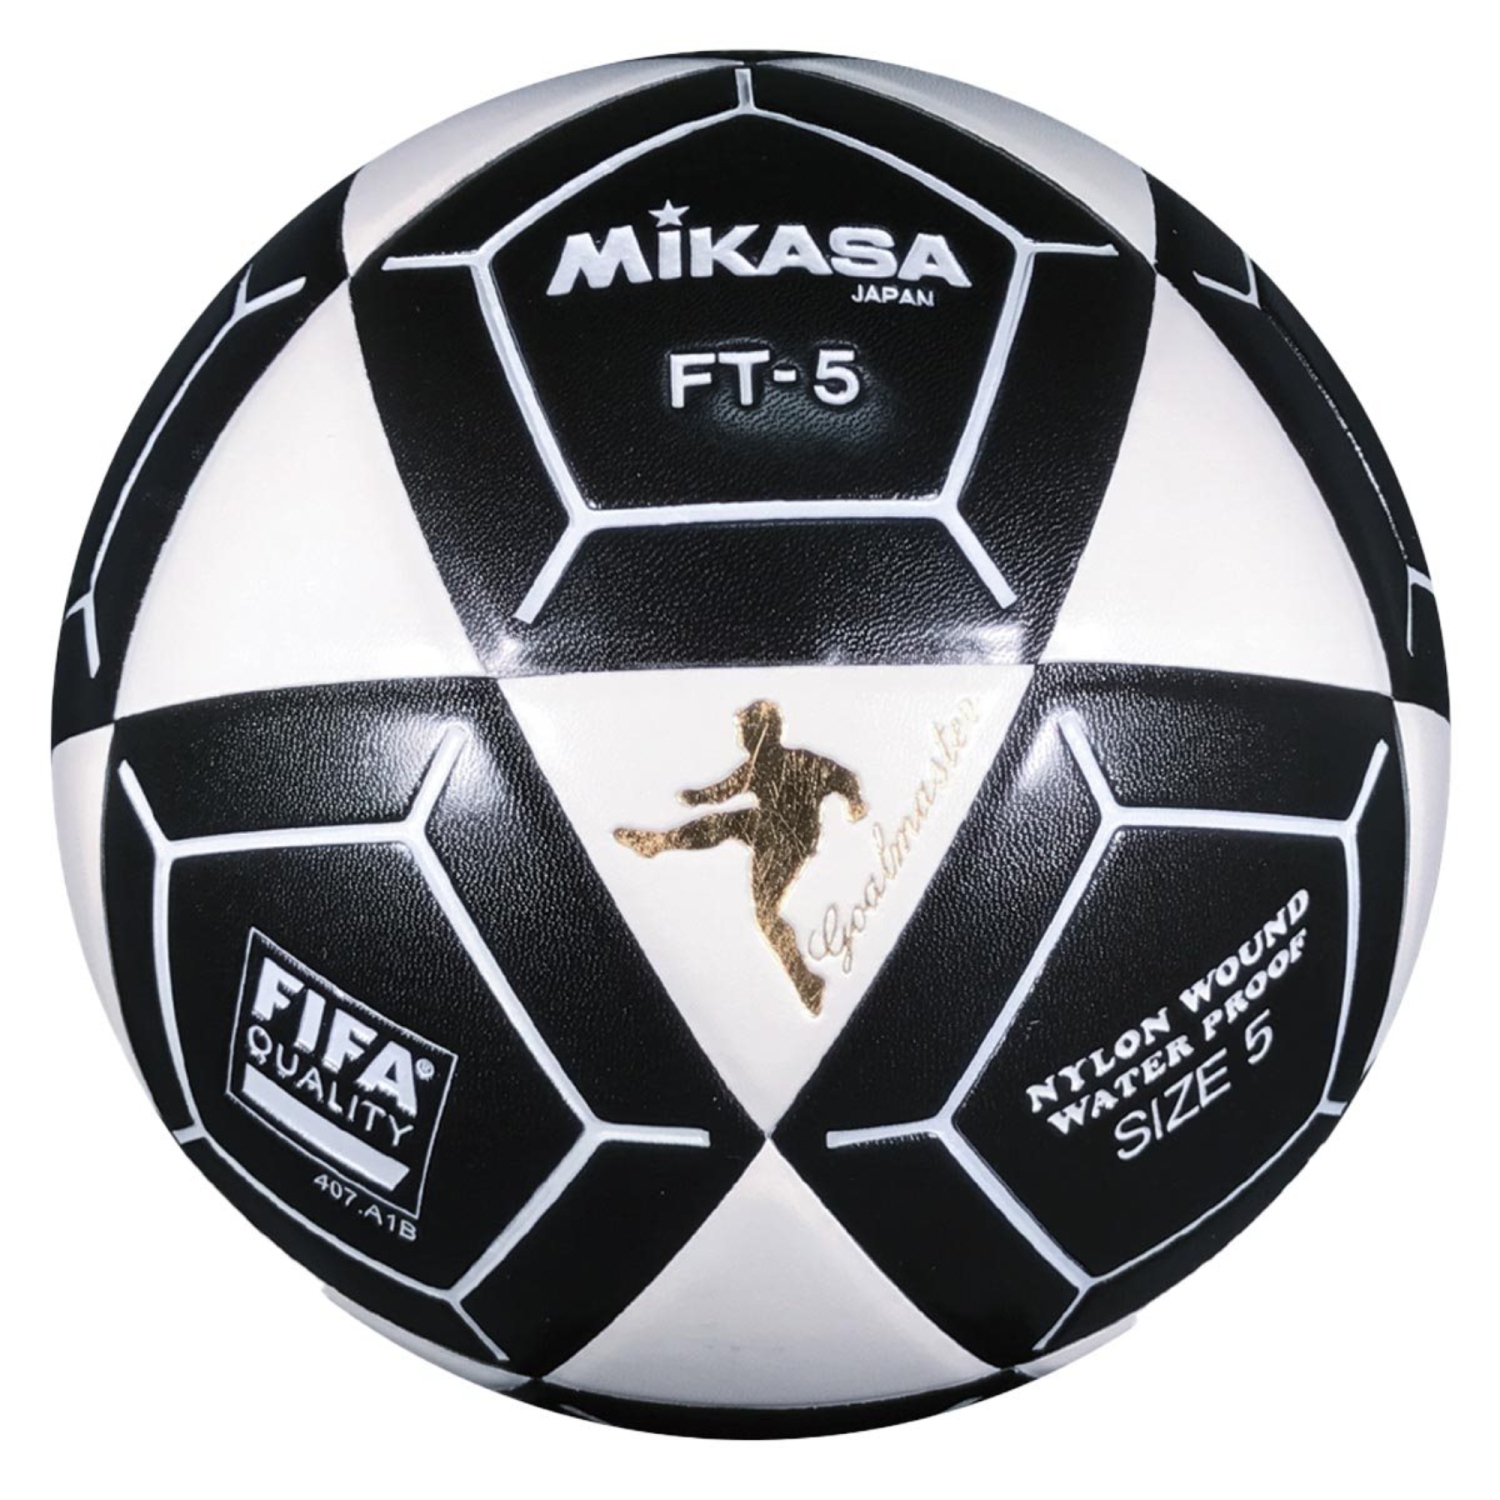 Mikasa Goal Master Soccer Ball - FT-5 Official FIFA and NFA Footvolley Size 5, White/Black